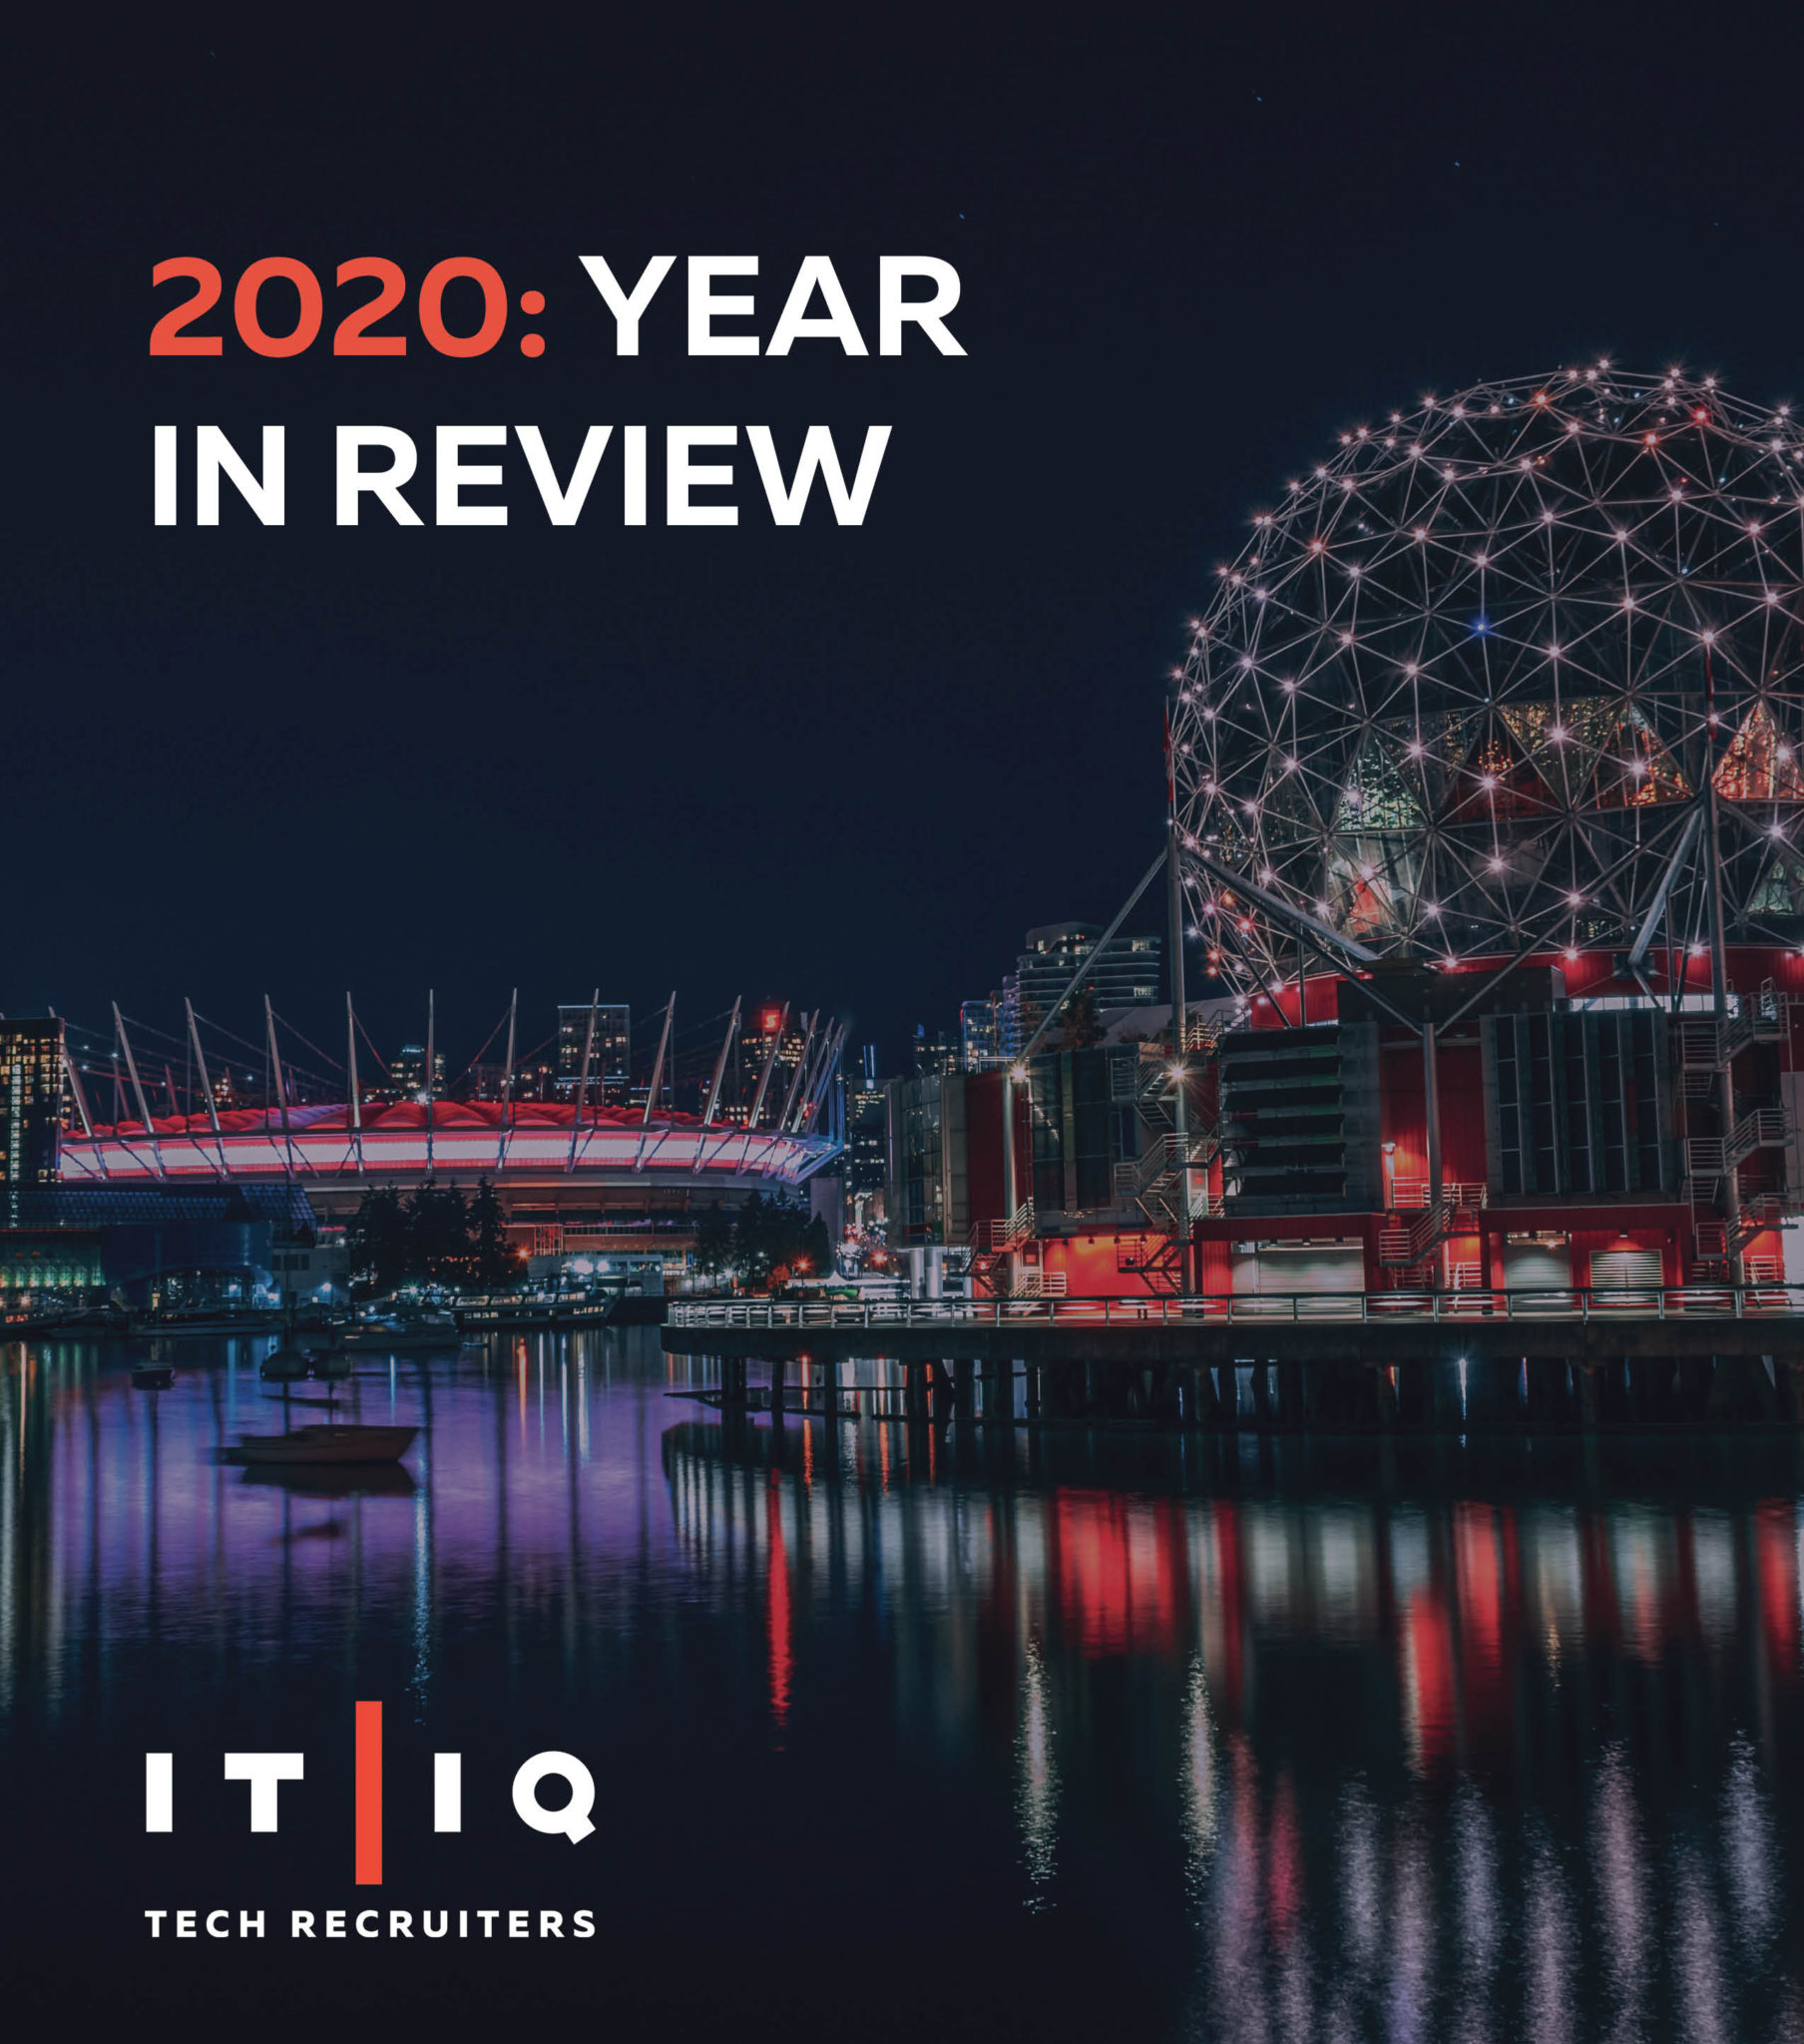 IT/IQ 2020: Year in Review Graphic Photo Background Vancouver, Canada